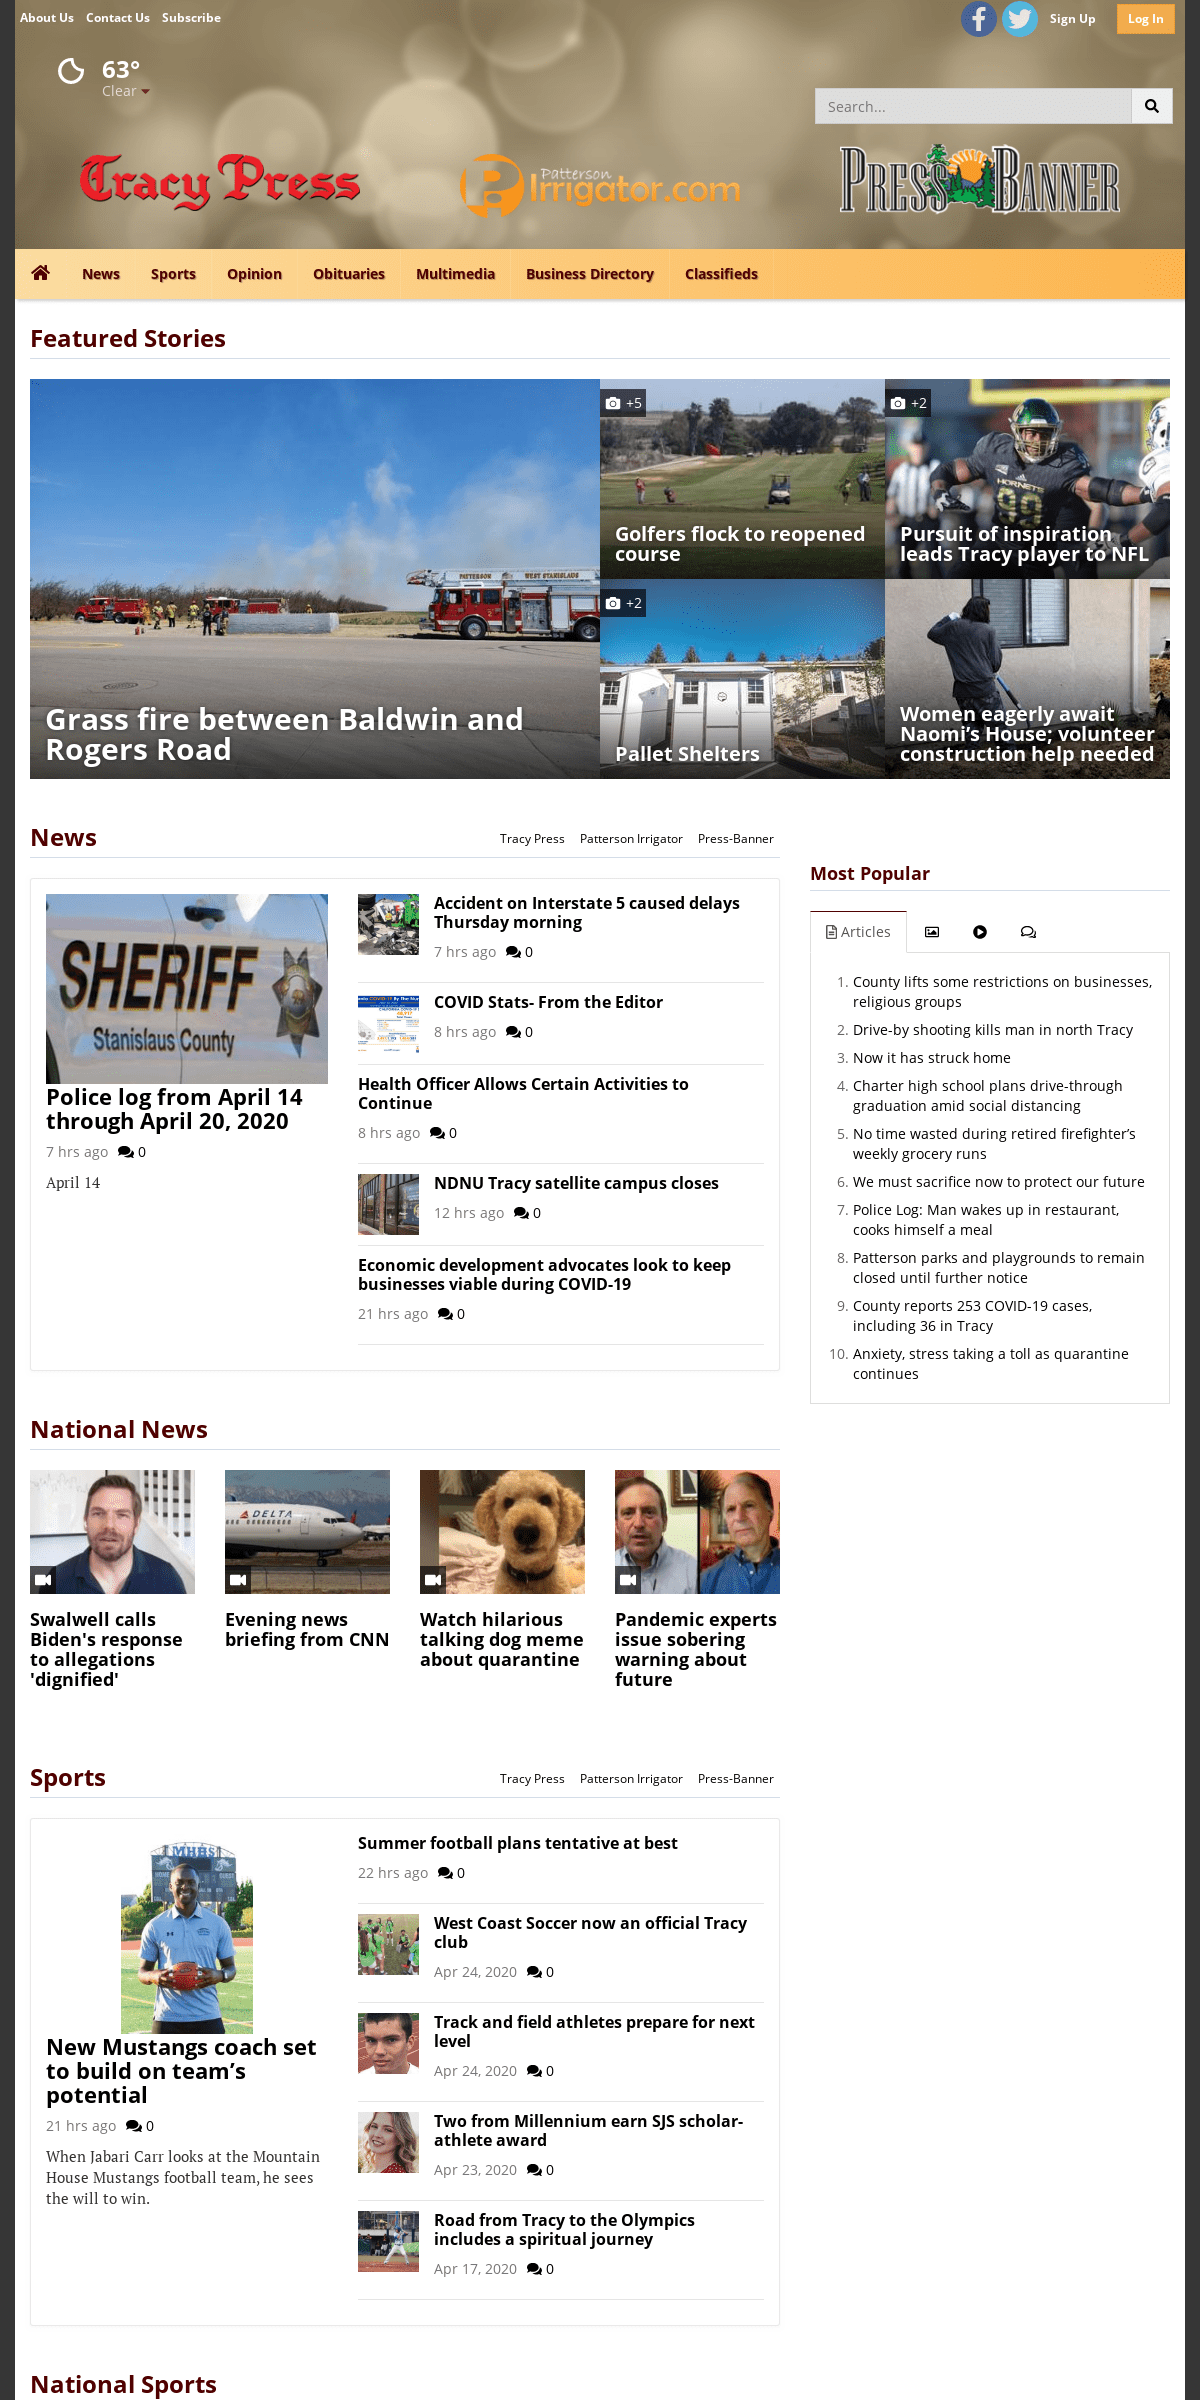 A complete backup of goldenstatenewspapers.com